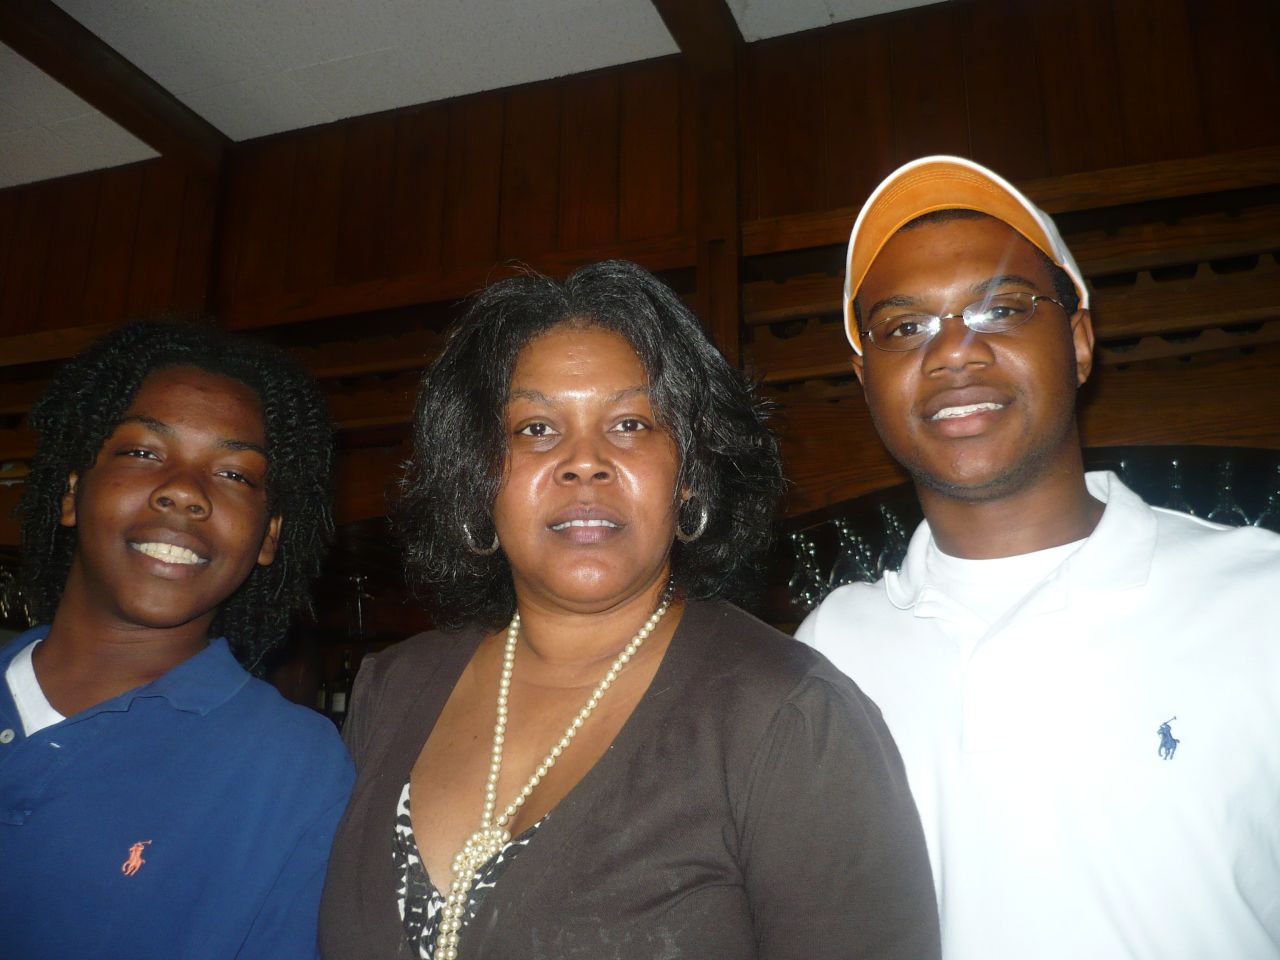 Marilyn Hegman-Davis' sons Aaron Davis, left, and Nicholas Pegues took her to brunch at Paulette's Restaurant in Memphis in 2010. Paulette's is a a family favorite, Pegues said, and his mom was pleased her sons remembered how much she loved it, and surprised her with a meal there.